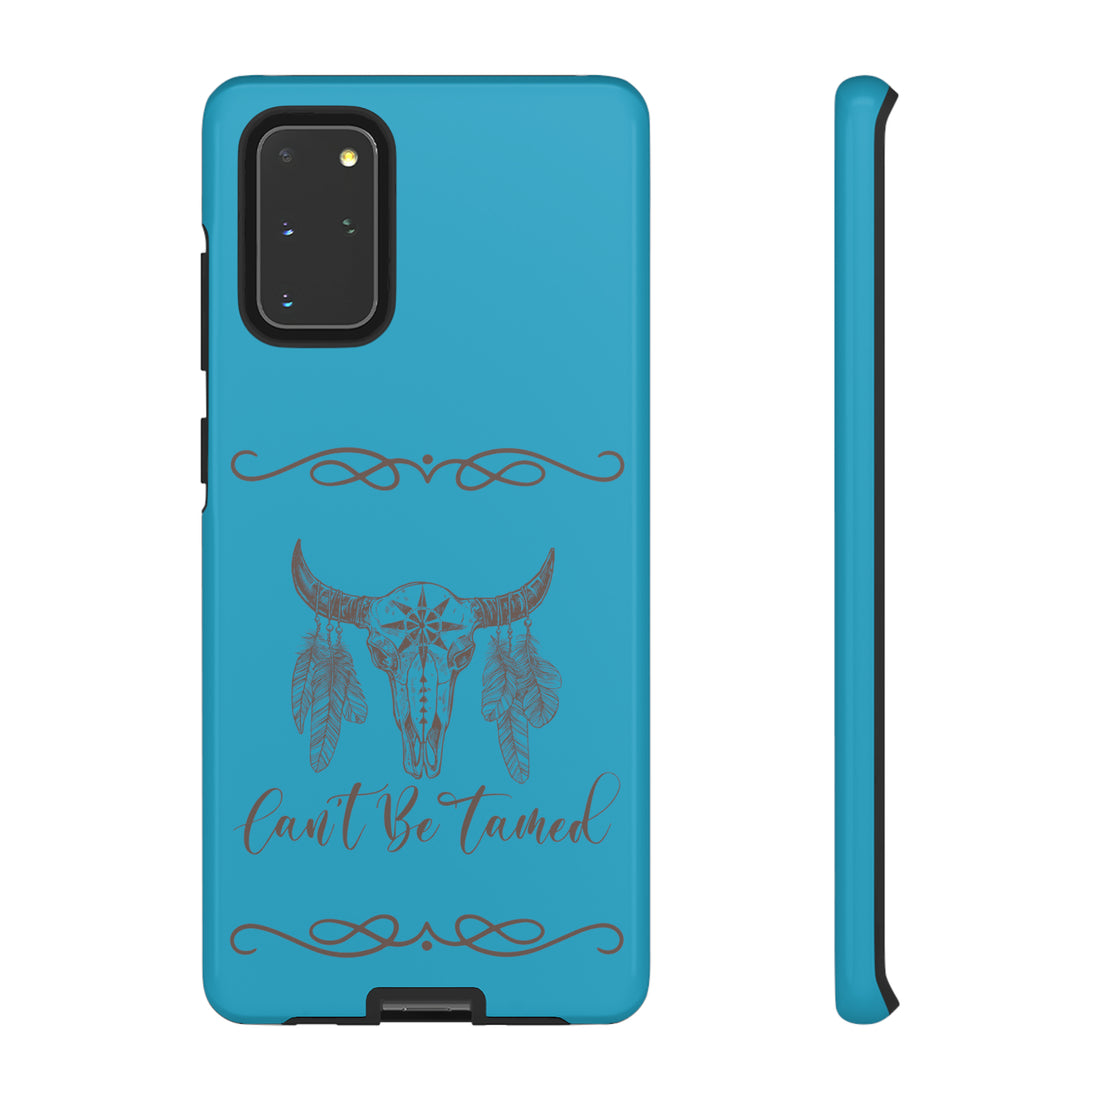 Can't Be Tamed Tough Cases - Phone Case - Positively Sassy - Can't Be Tamed Tough Cases